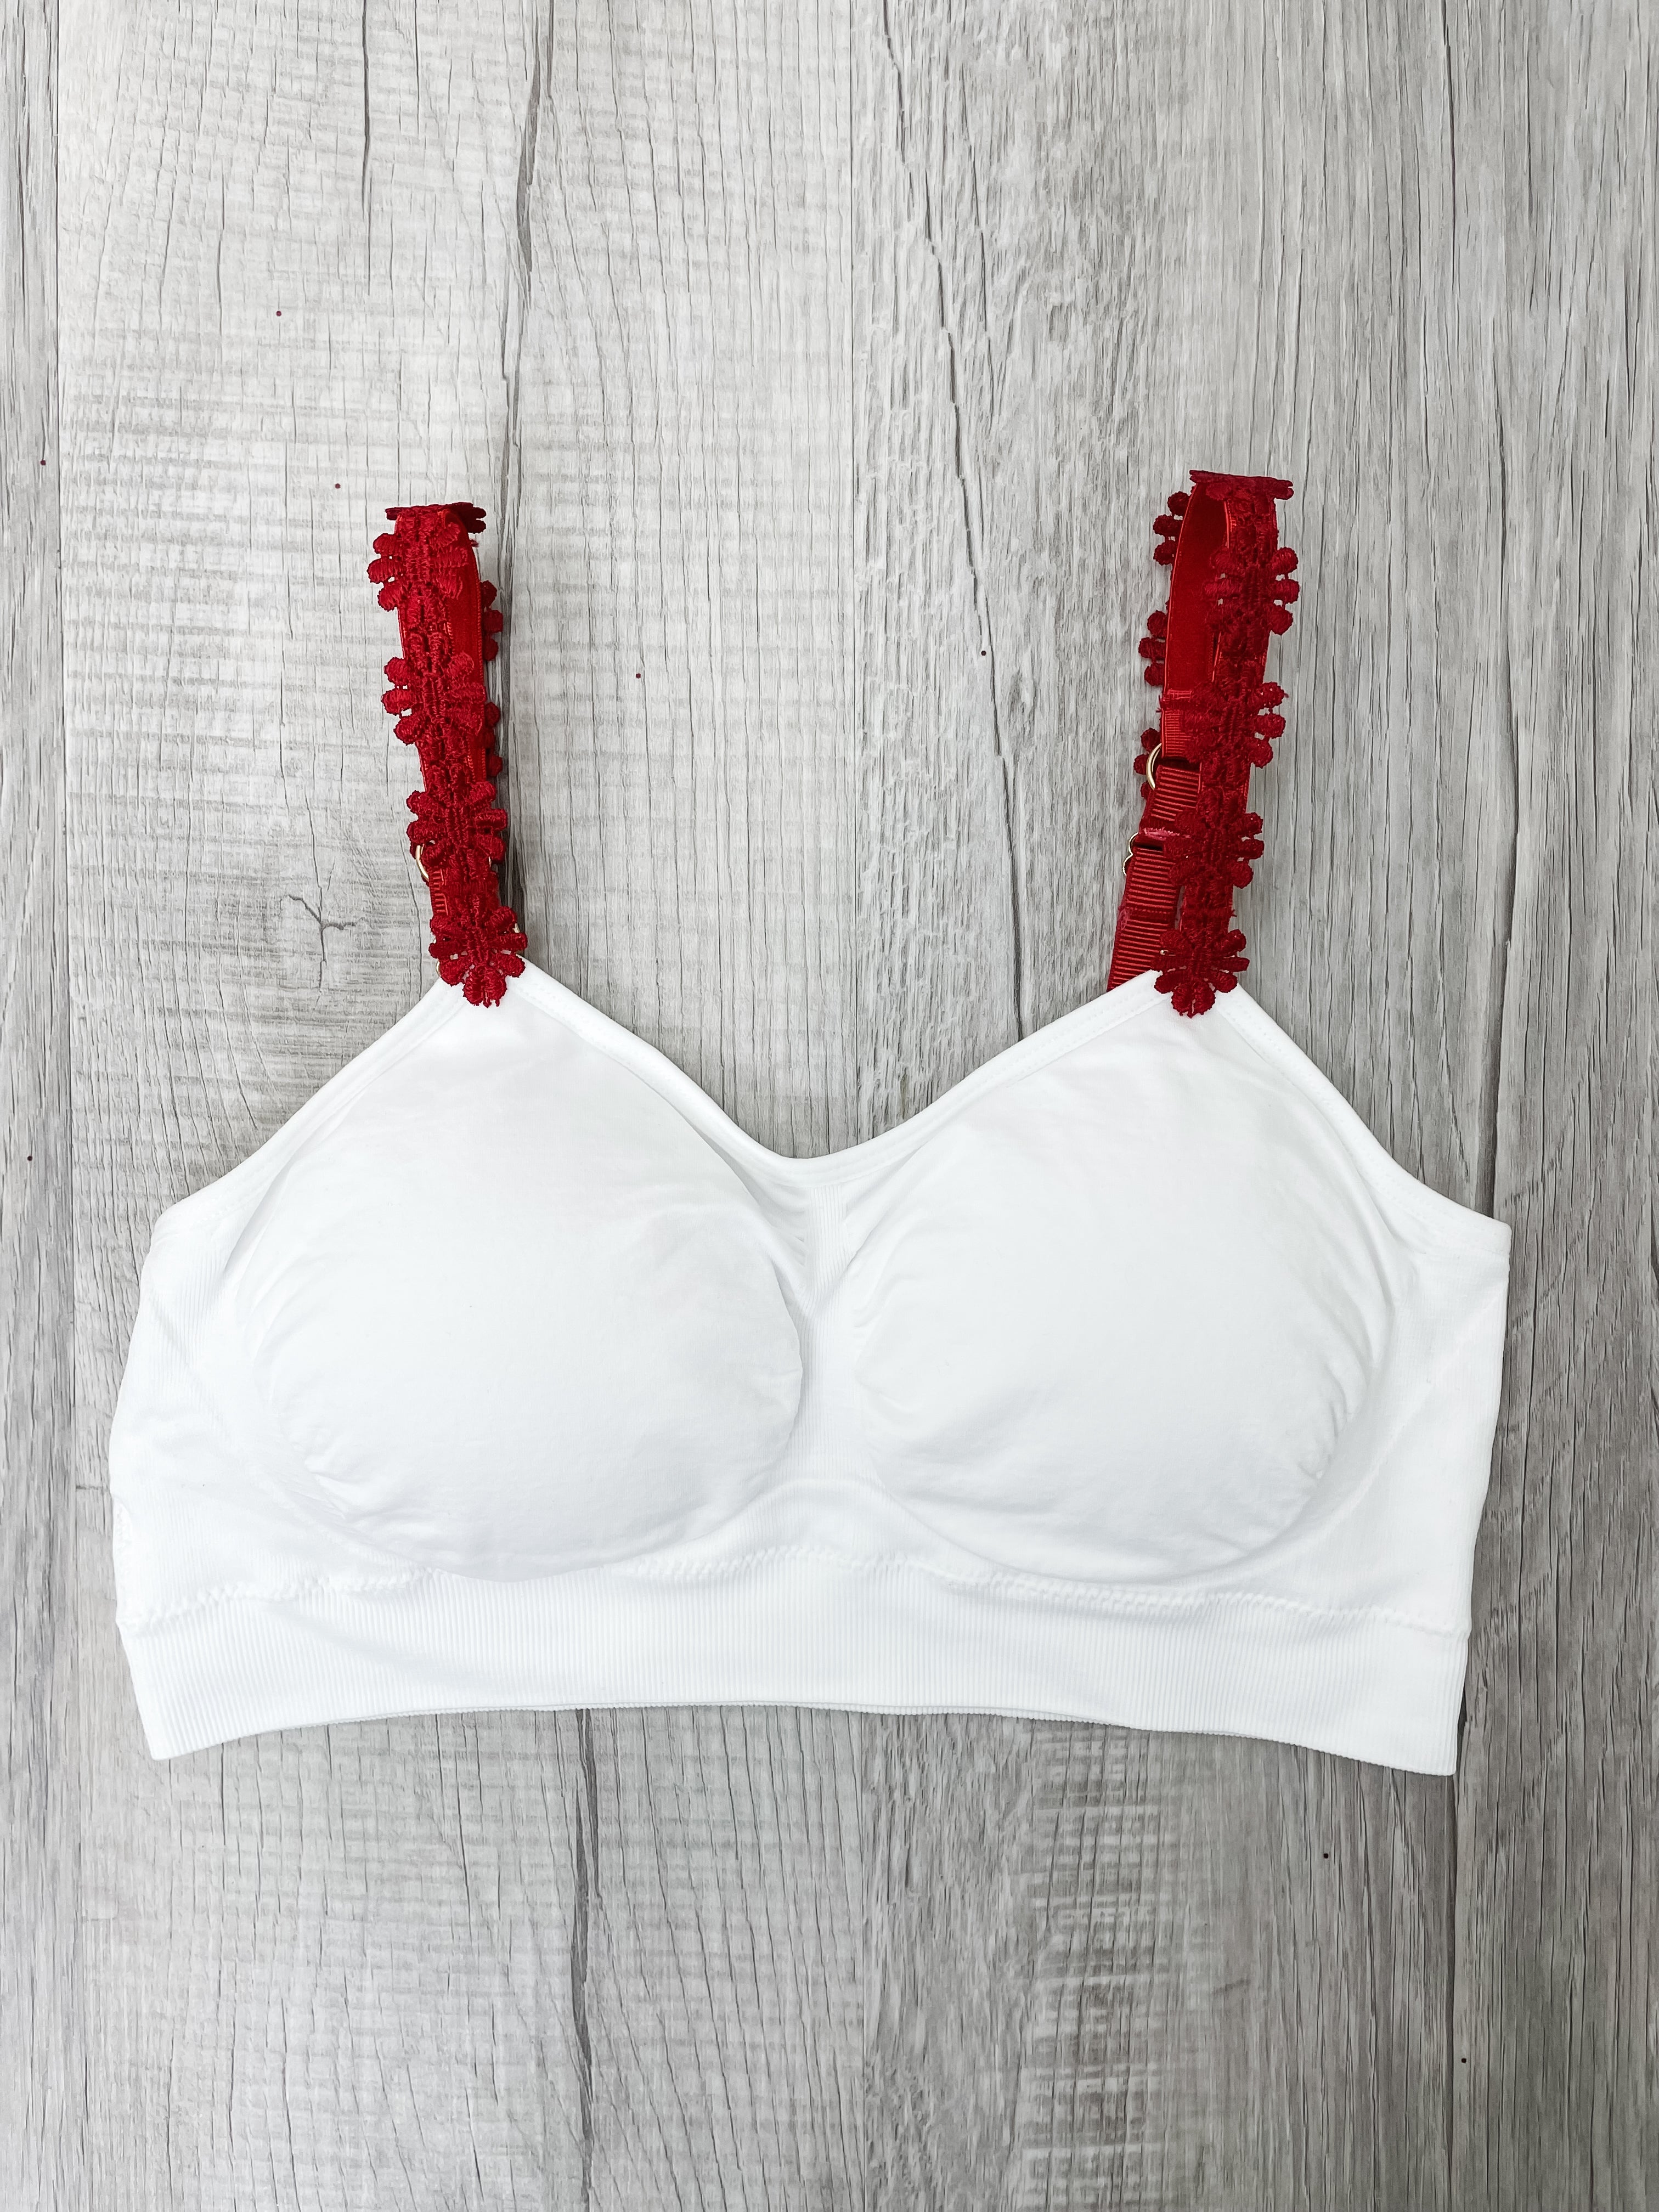 Strap It Bra White With Red Embroidered Flower